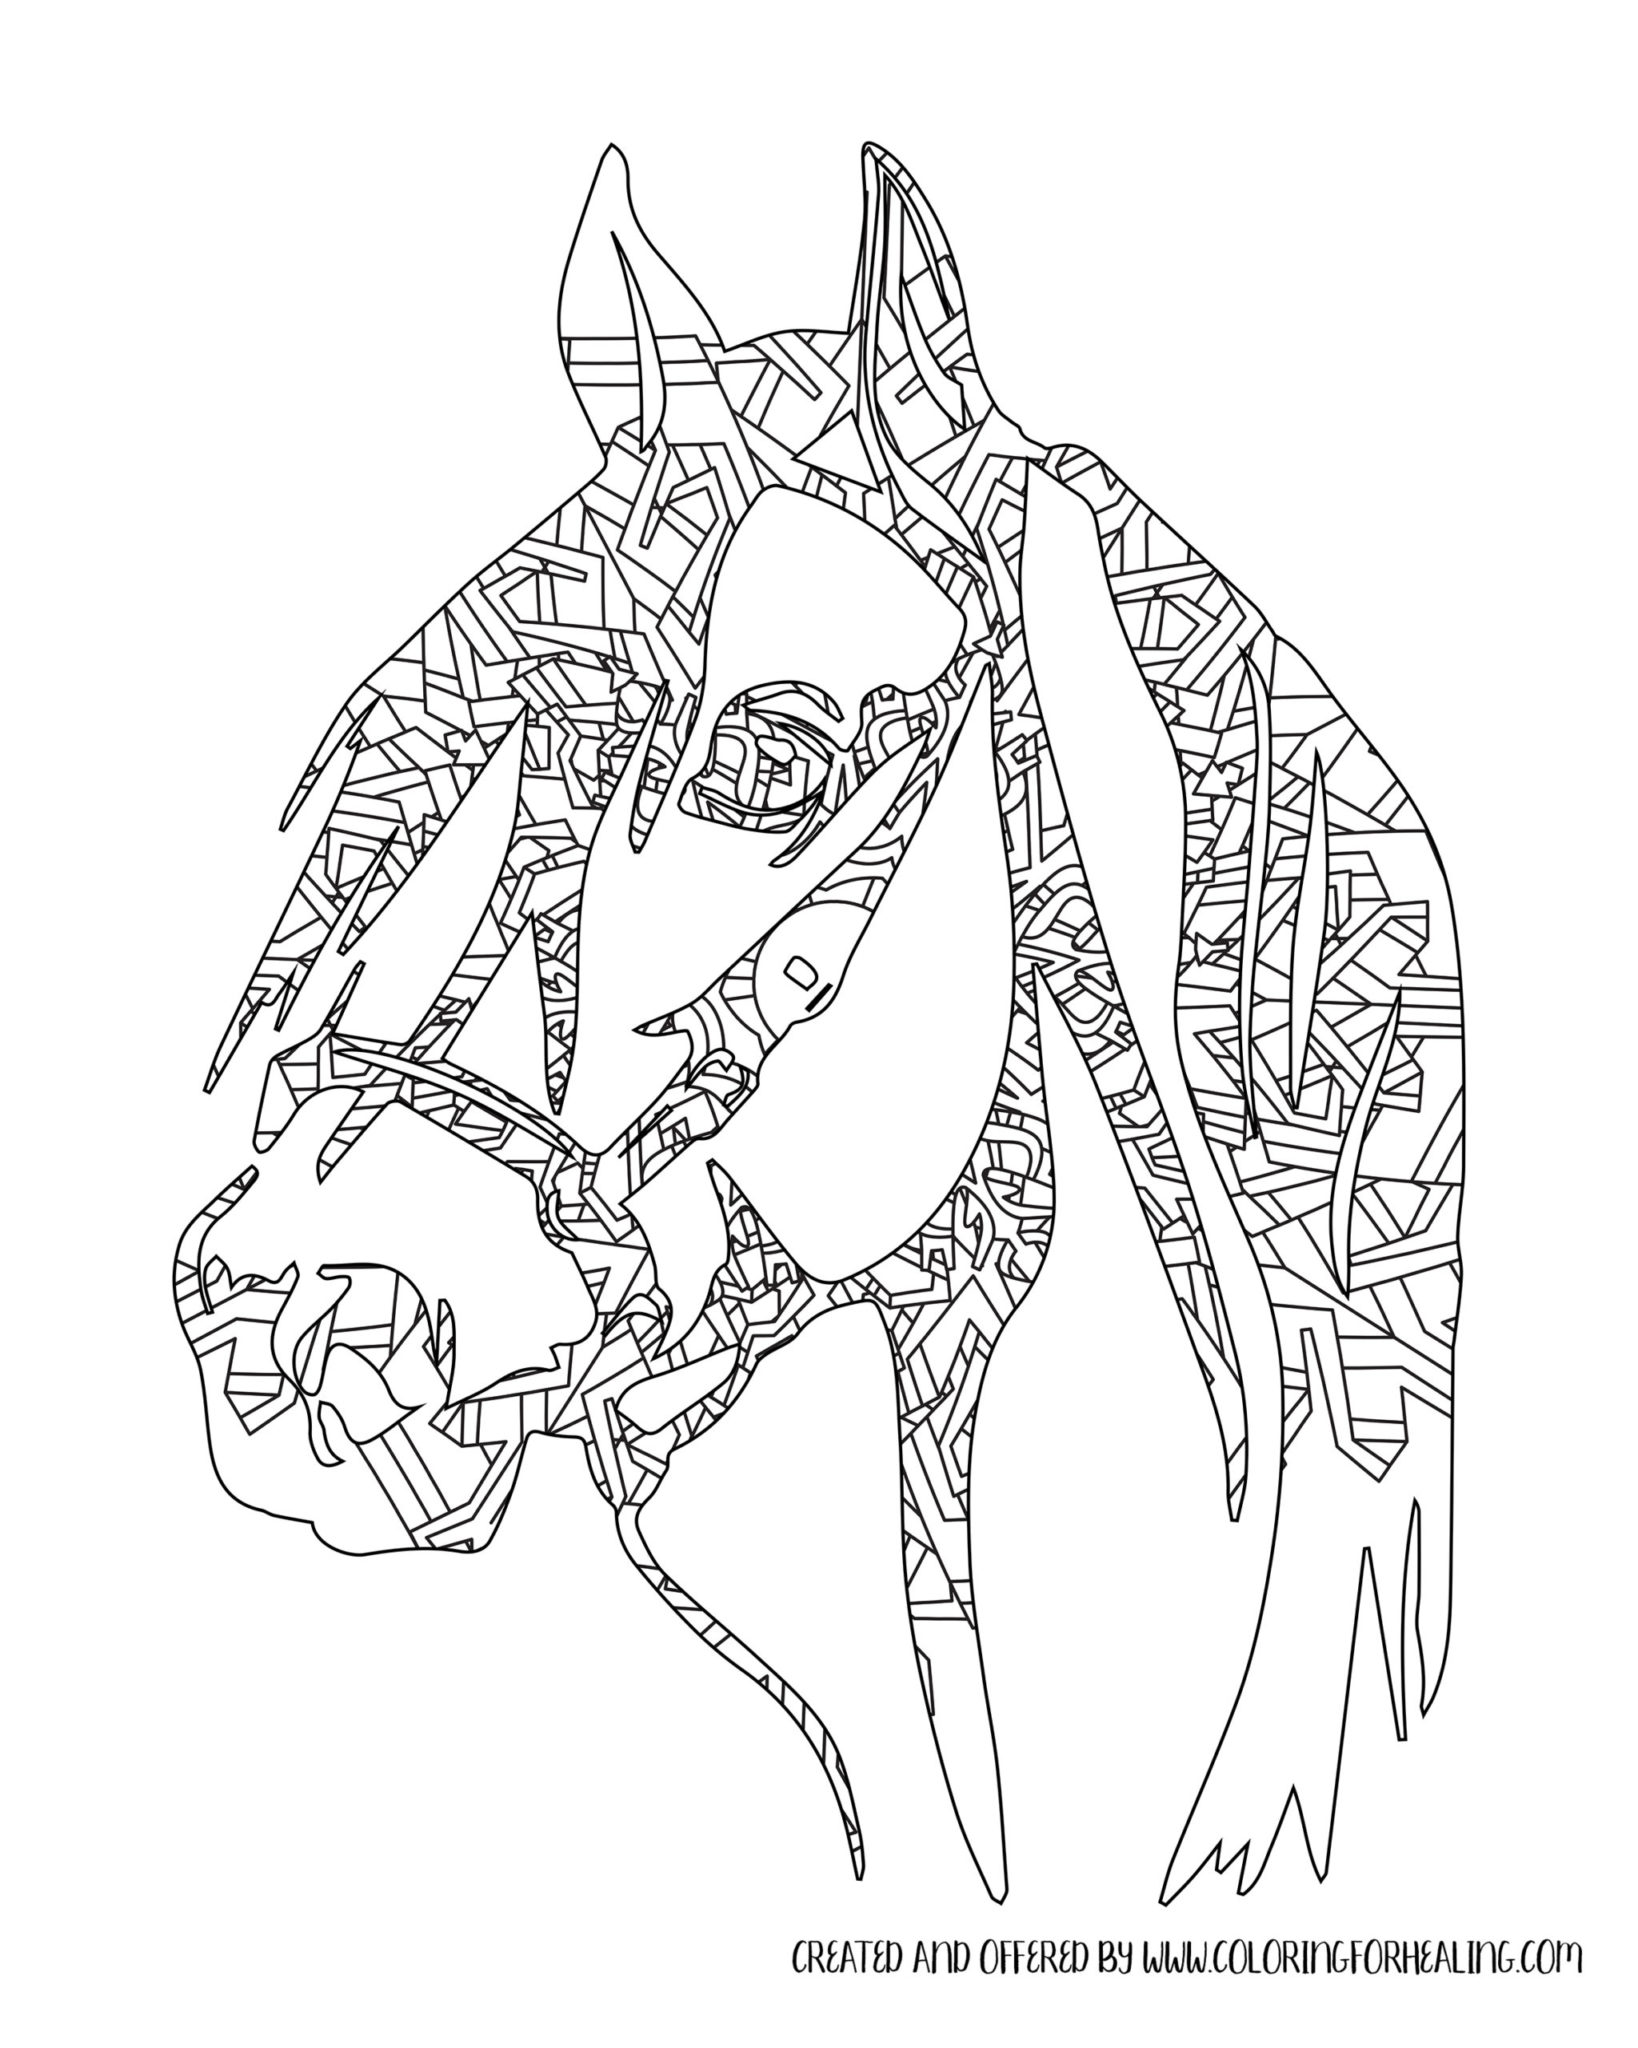 Free Printable Fun Intricate Mandala Horse Head Adult Coloring Page - Coloring For Healing